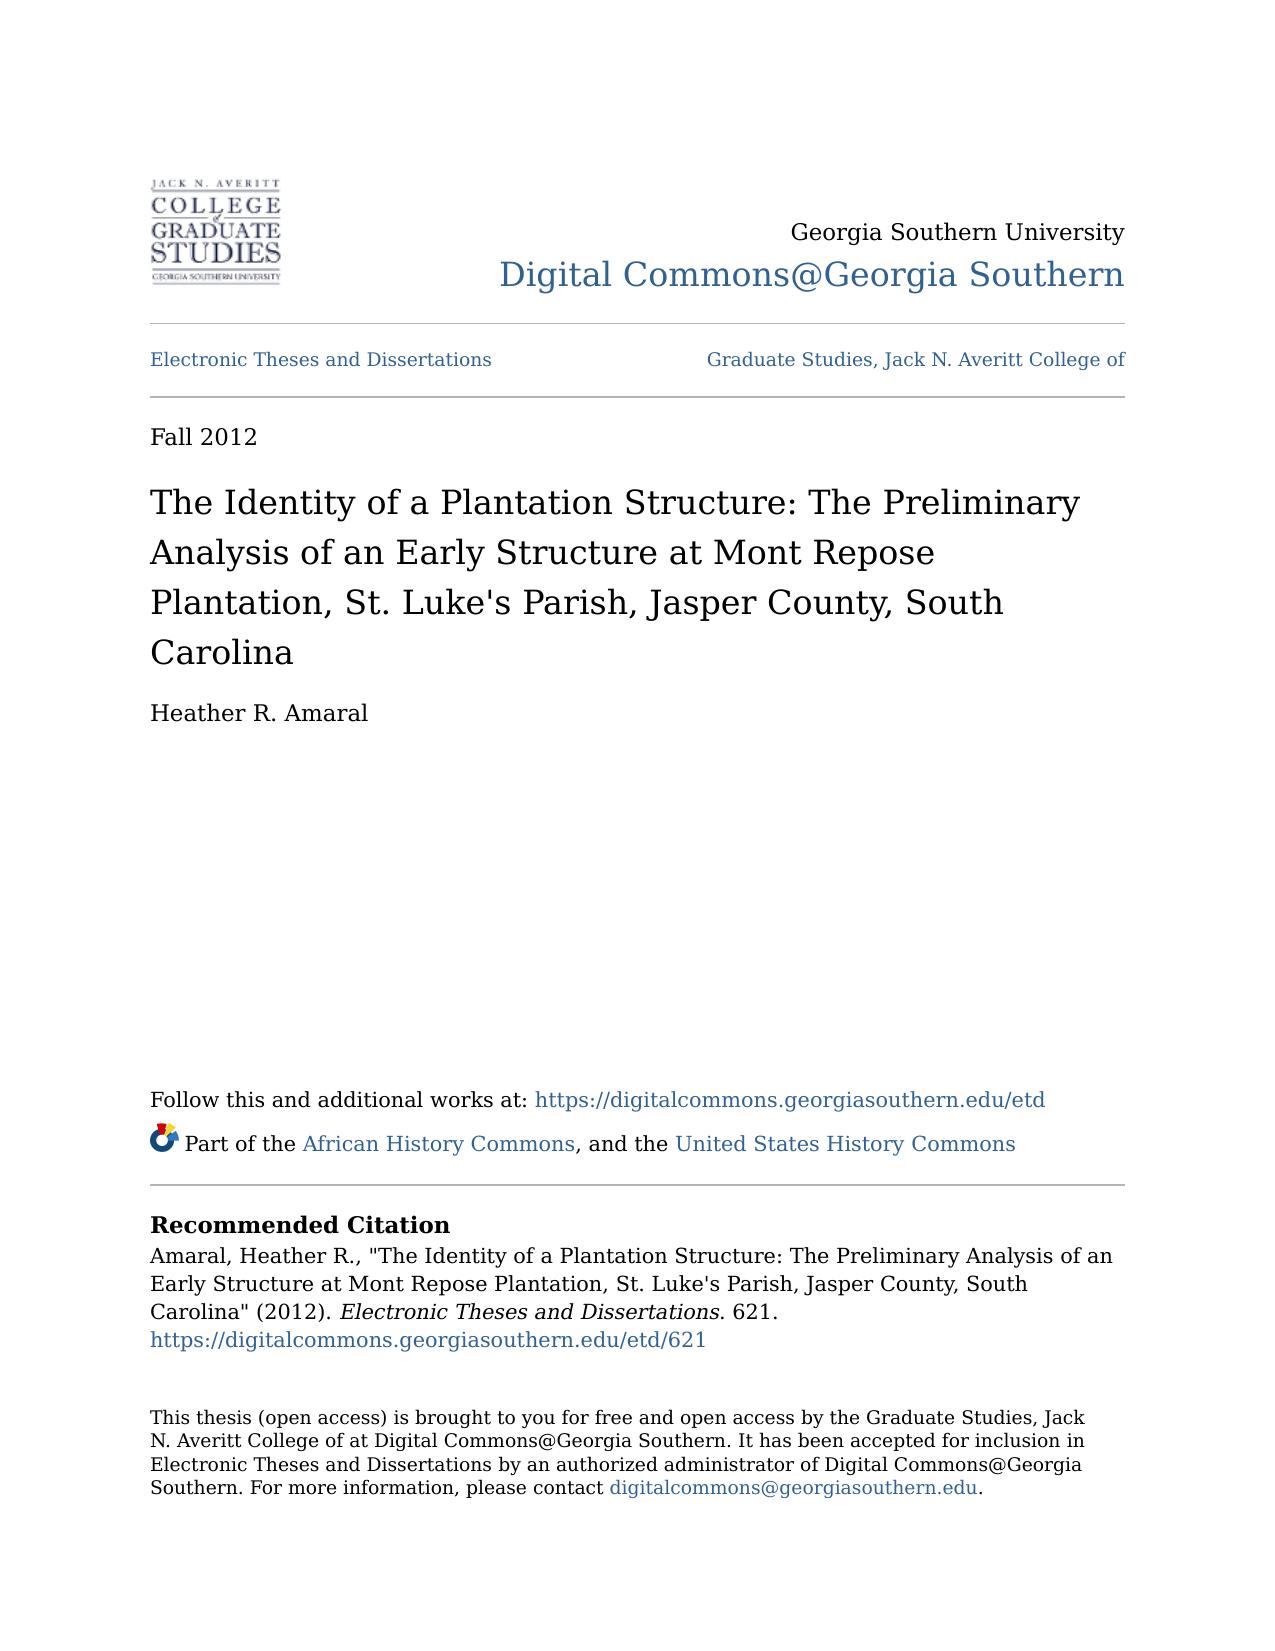 The Identity of a Plantation Structure: The Preliminary Analysis of an Early Structure at Mont Repose Plantation, St. Luke's Parish, Jasper County, South Carolina